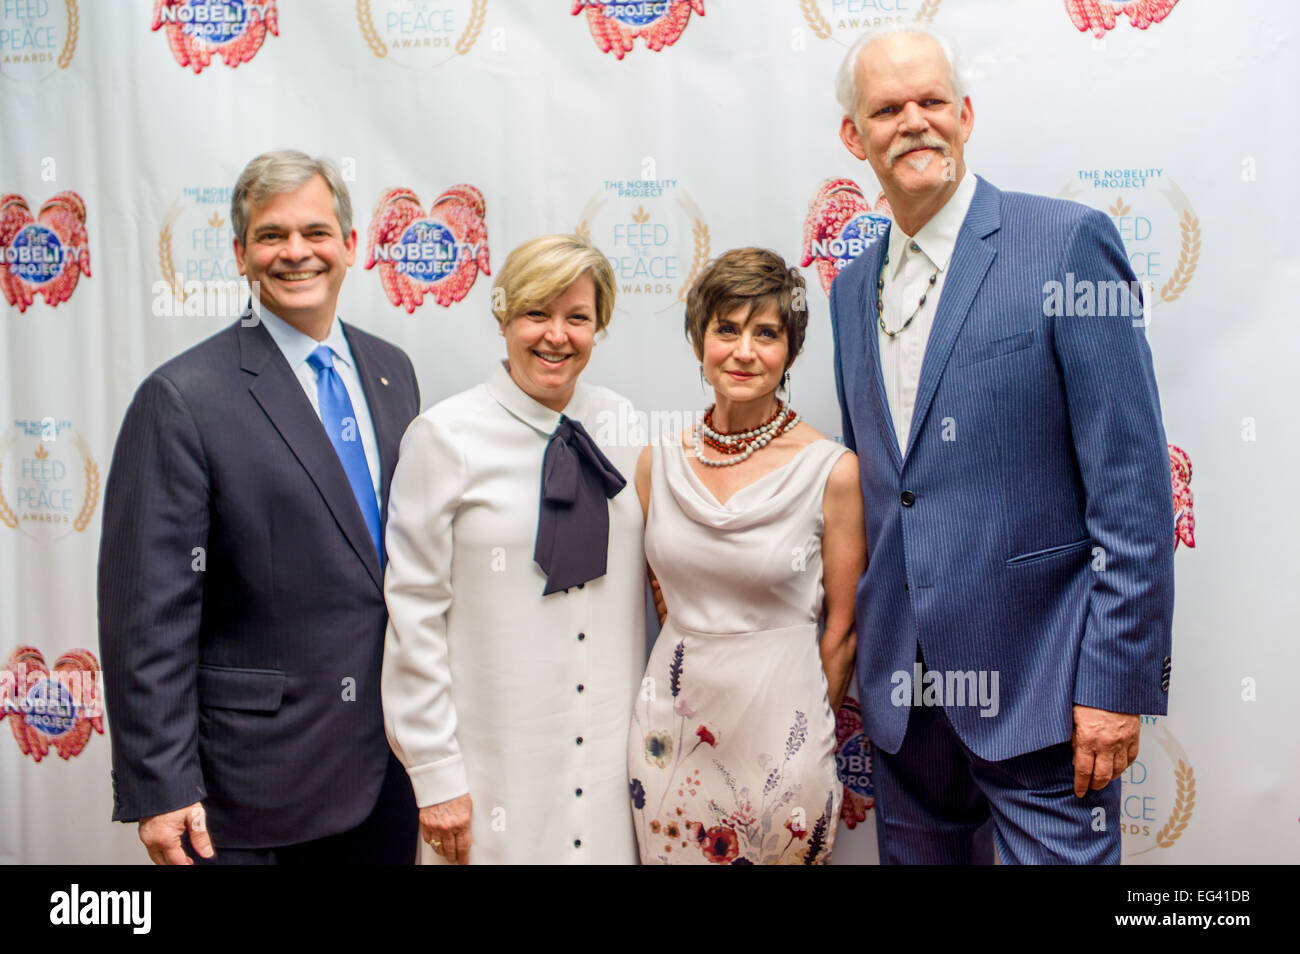 Austin, Texas, USA. 15th Feb, 2015. From left to right: Austin, Texas mayor Steve Adler, with his wife Diane Land, Christie Pipkin Executive Director of The Nobelity Project and Turk Pipkin founder of The Nobelity Project. The Nobelity Project partners with communities to bring education to all by providing classrooms, libraries, computers, books, clean water, health support, information centers, and student scholarships to those in need. Currently investing in student success in Kenya, Honduras, Nepal, and the US. Credit:  J. Dennis Thomas/Alamy Live News Stock Photo